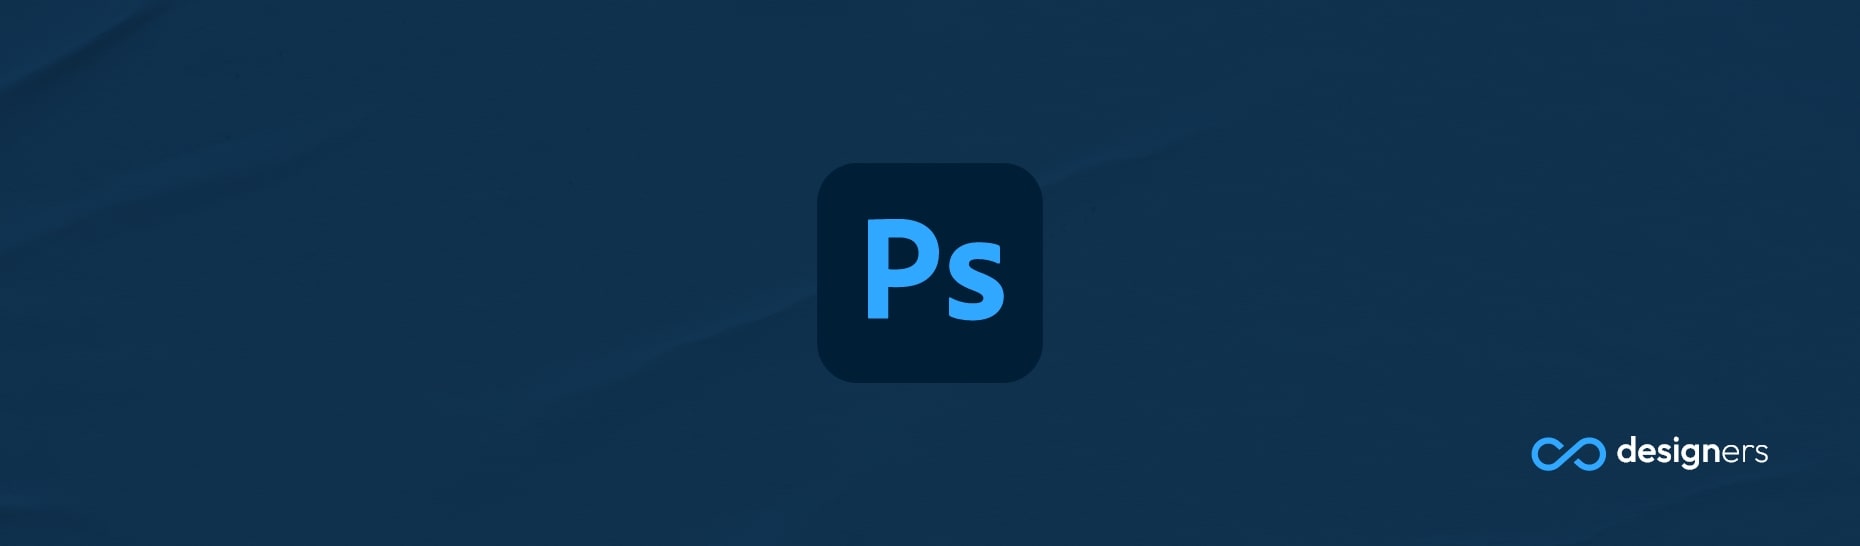 How Do I Reduce the Size of a GIF in Photoshop?